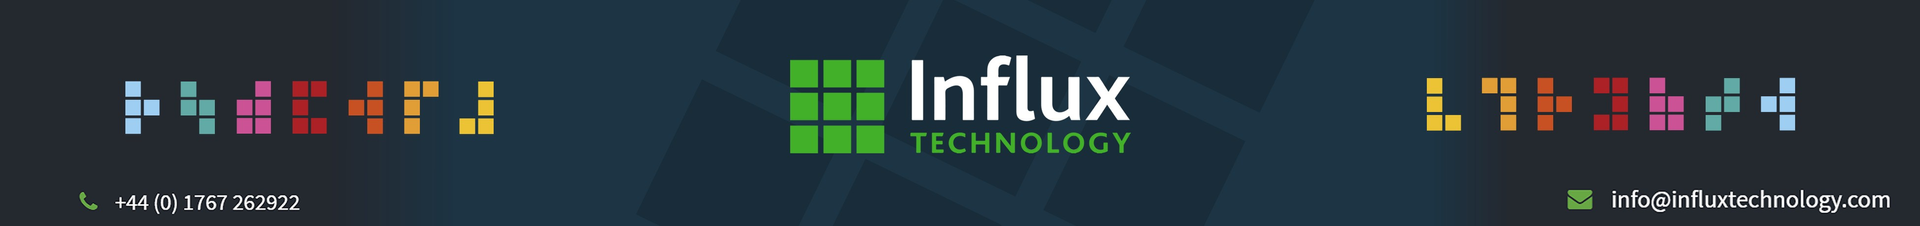 Influx Technology